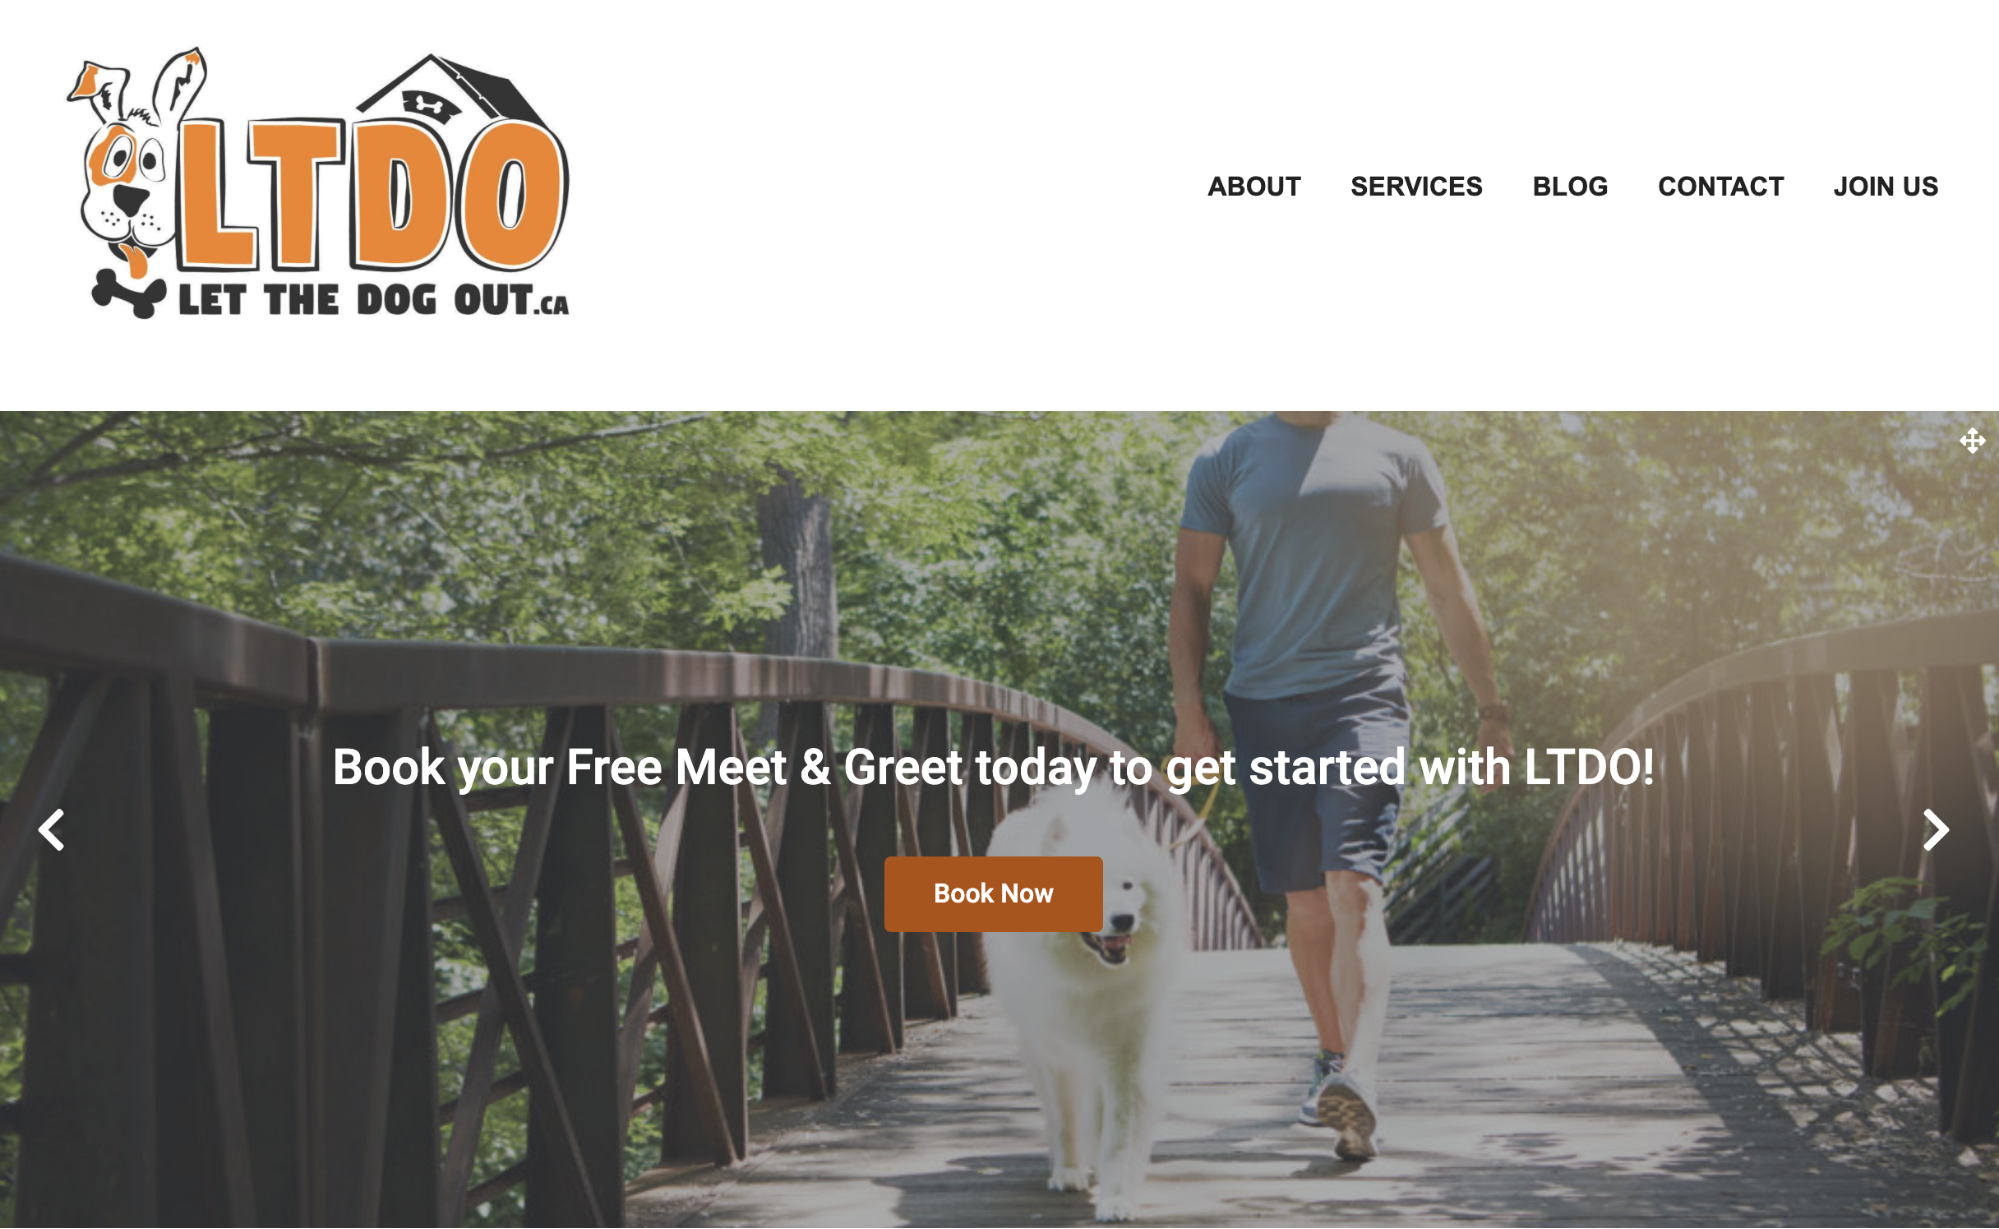 Website for Let the Dog Out that features a man with a dog walking across a wooden bridge.